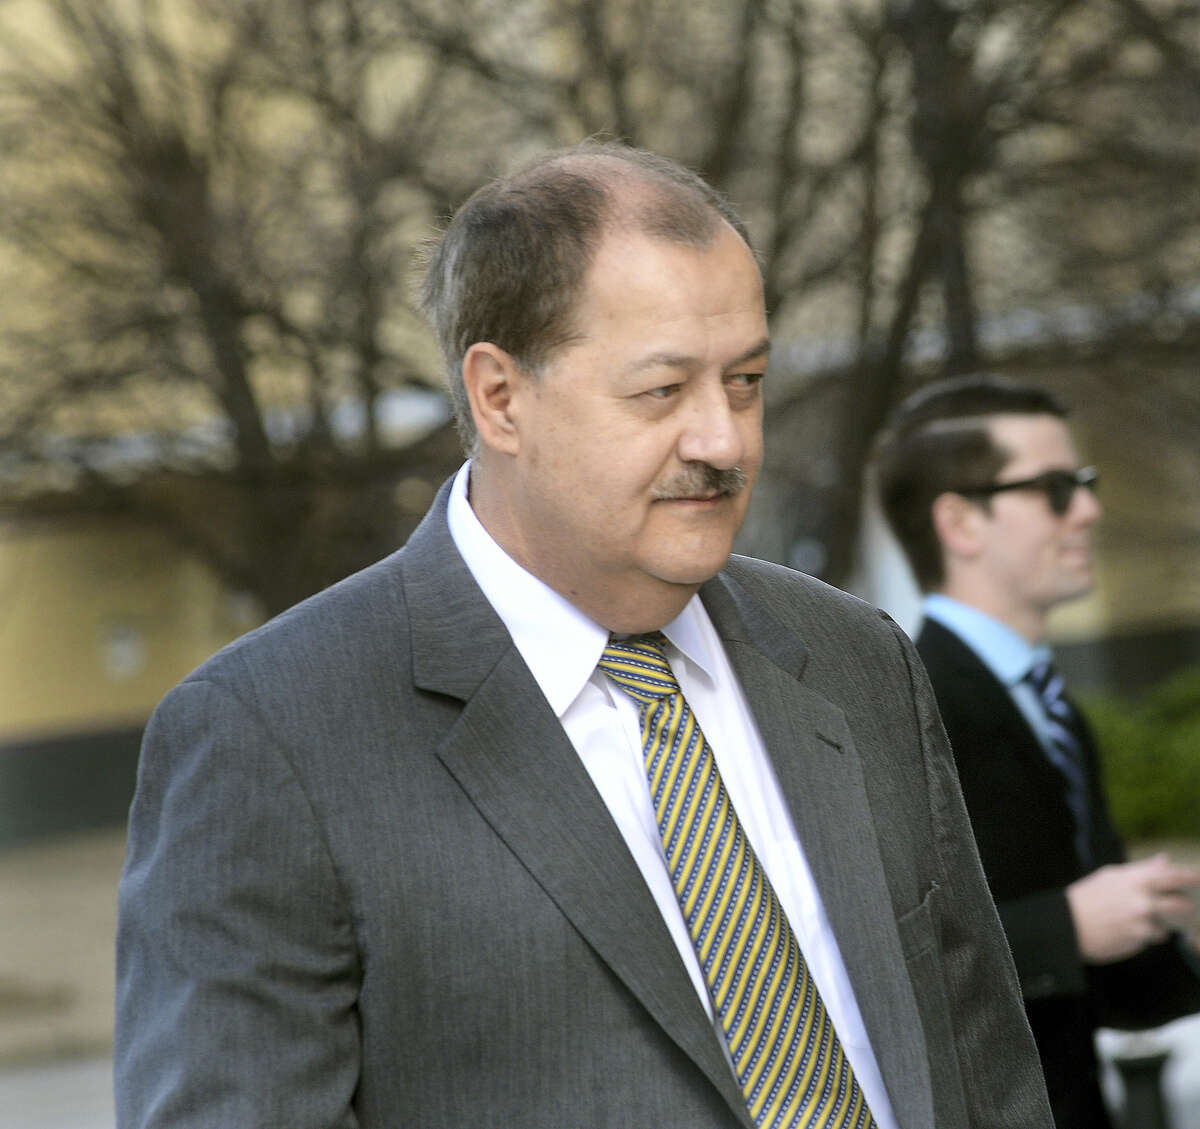 In an April 6, 2016 photo, former Massey CEO Don Blankenship is escorted by Homeland Security officers from the Robert C. Byrd U.S. Courthouse in Charleston, W.Va. Blankenship, who was sentenced to a year in jail and a $250,000 fine for his role in the Upper Big Branch Mine explosion, has declared himself an ‘American political prisoner’ on his blog, blaming others for the 2010 mine explosion that killed 29 men and led to the former West Virginia coal operator’s imprisonment.